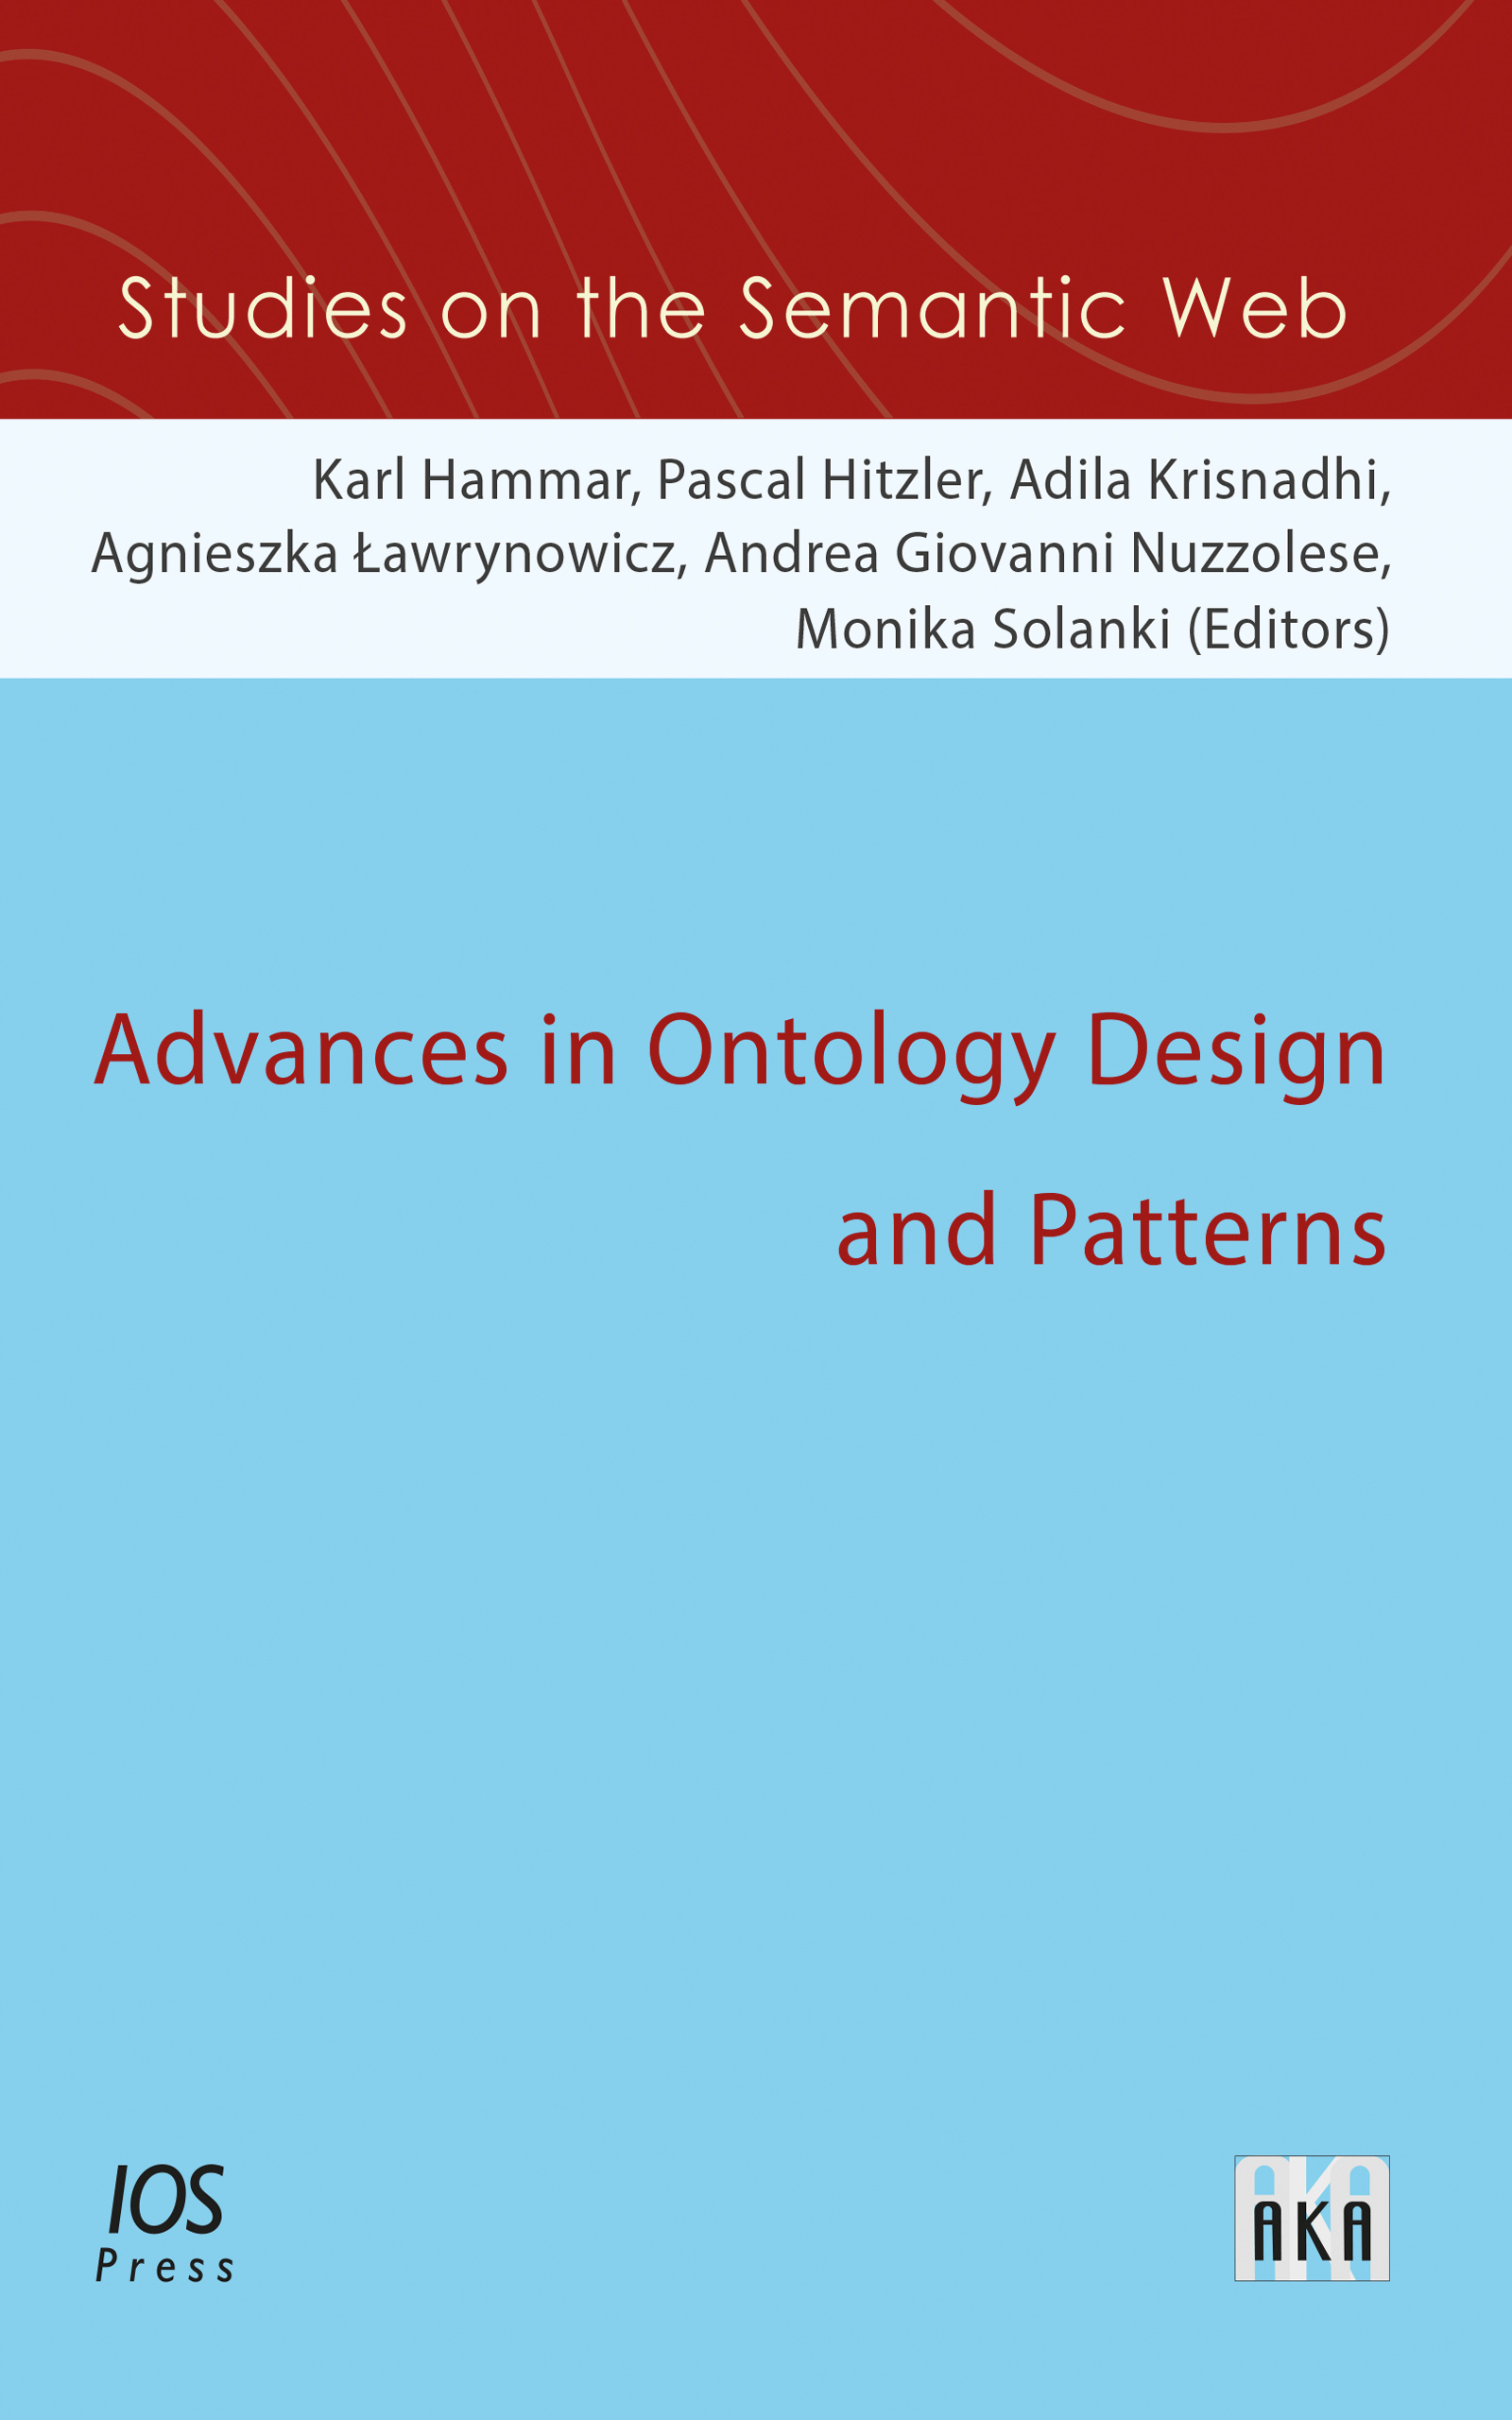 Advances in Ontology Design and Patterns